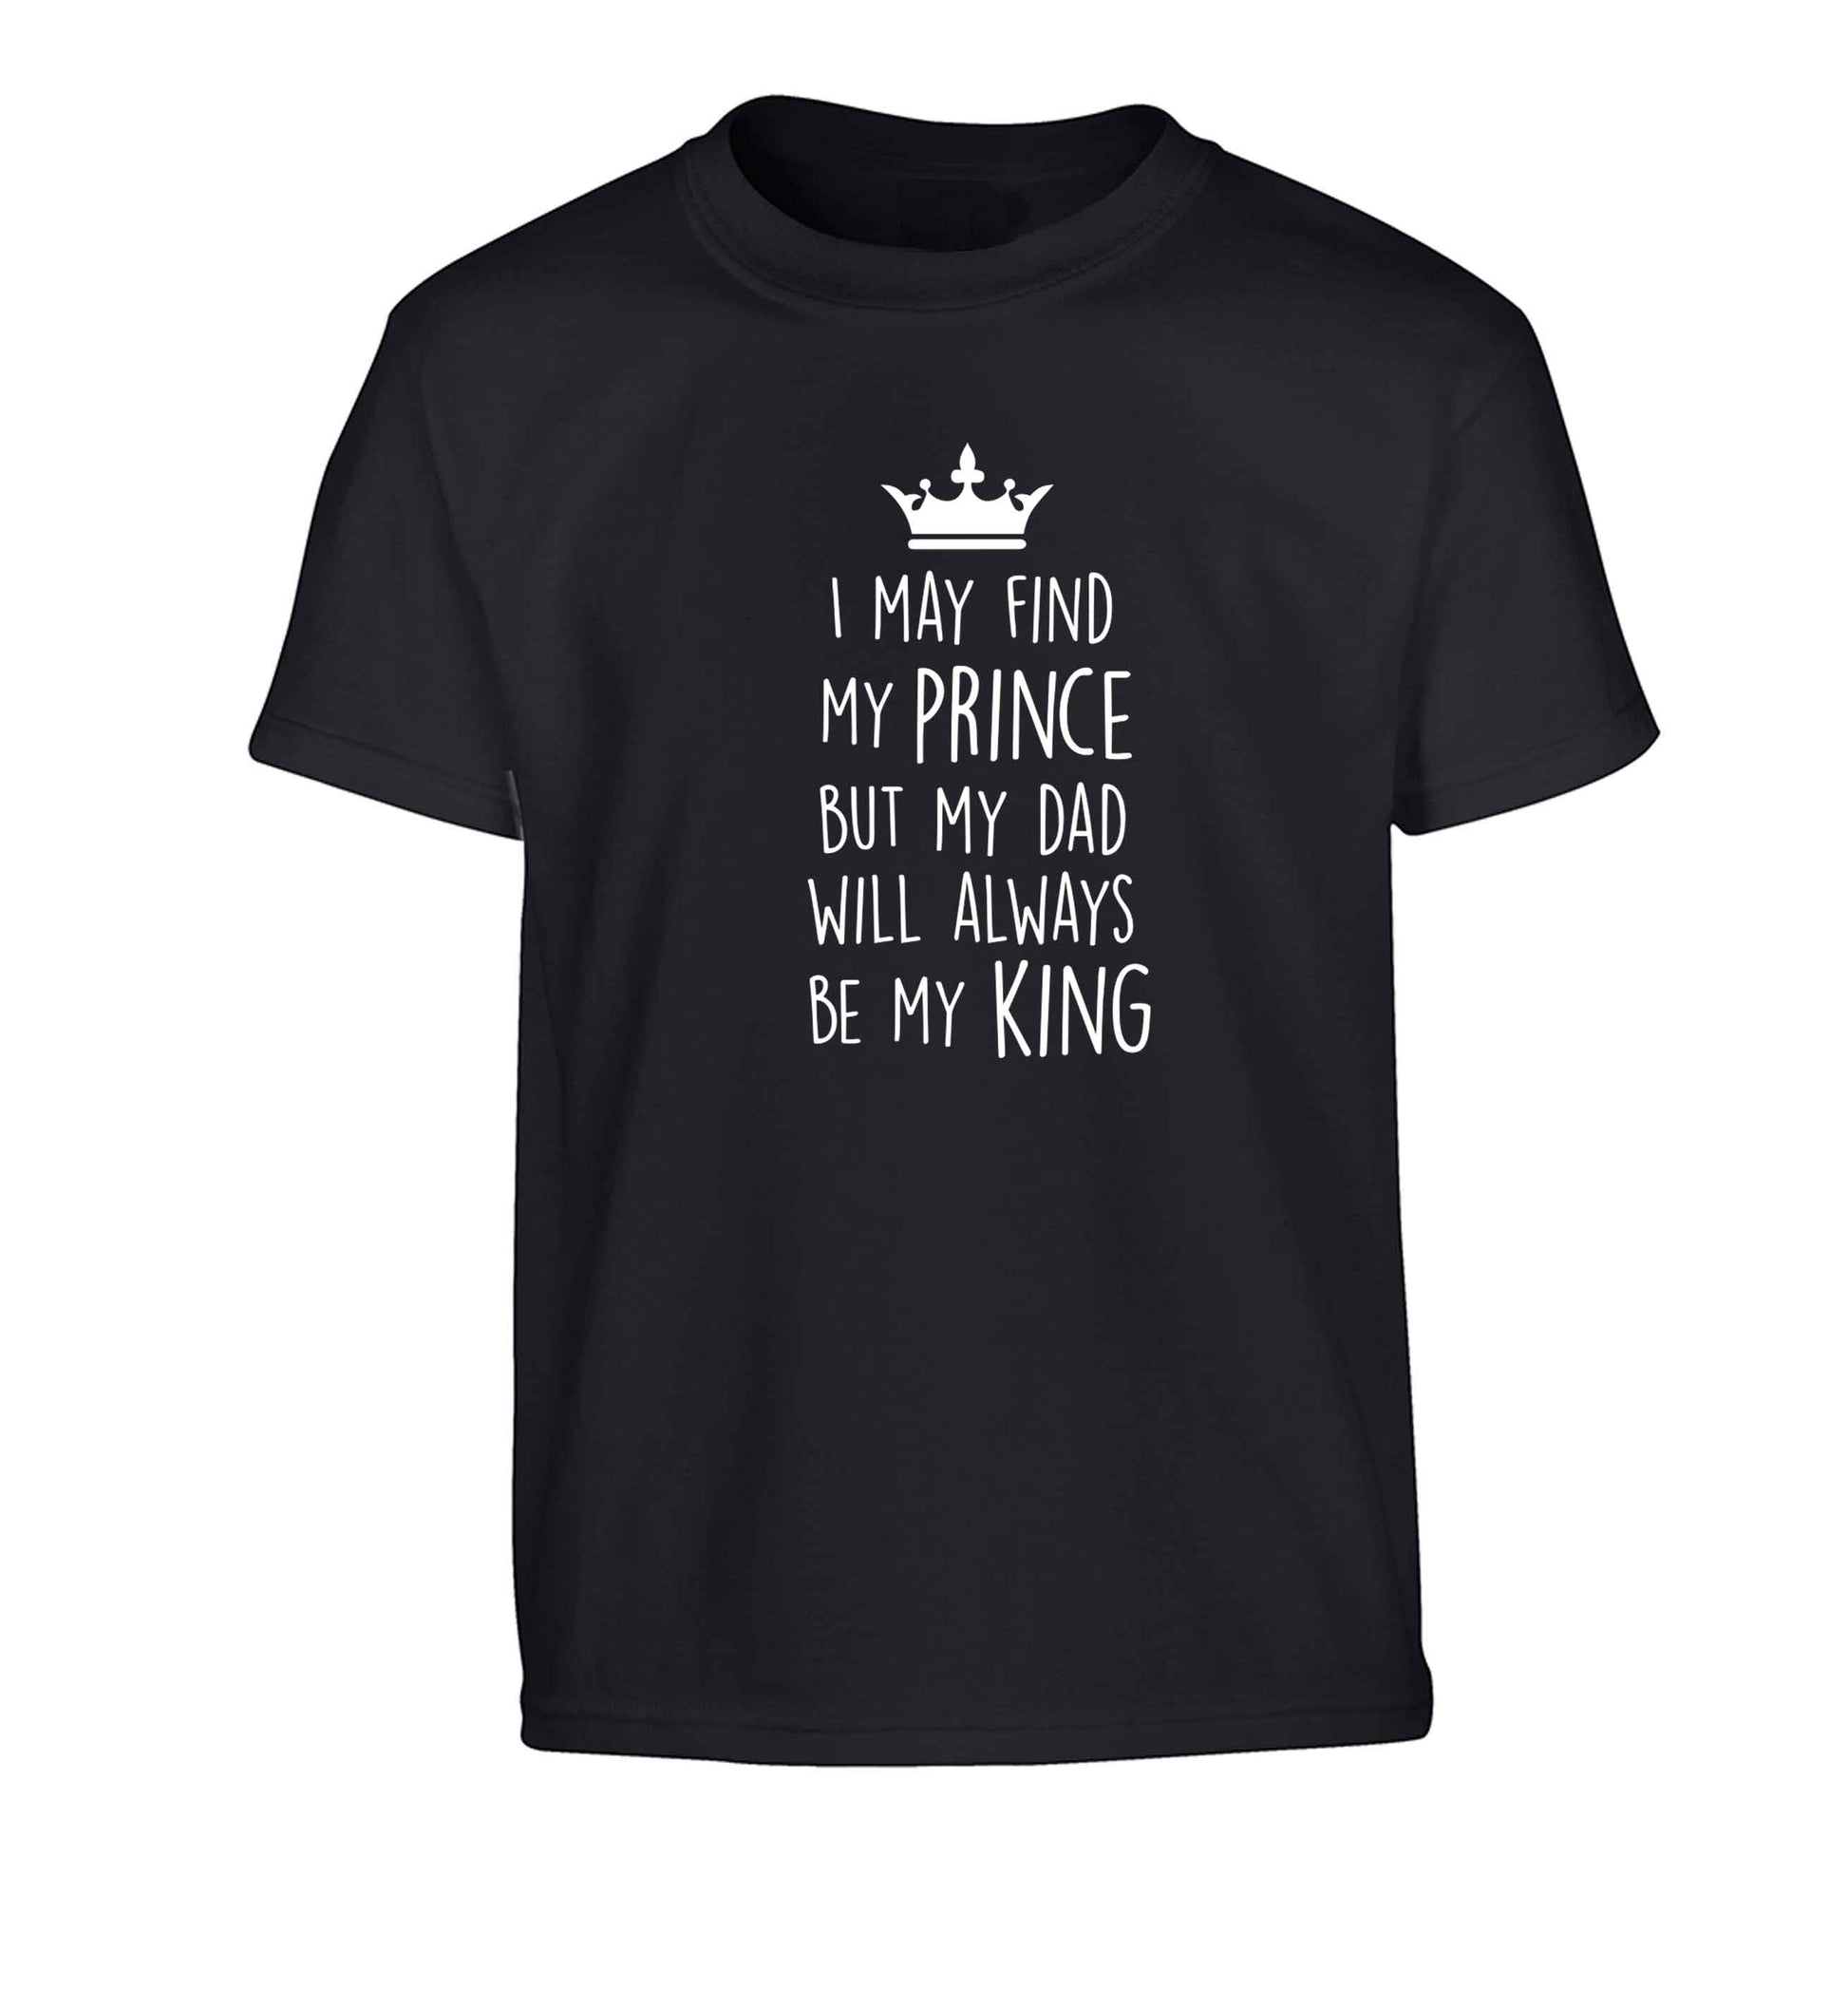 I may find my prince but my dad will always be my king Children's black Tshirt 12-13 Years